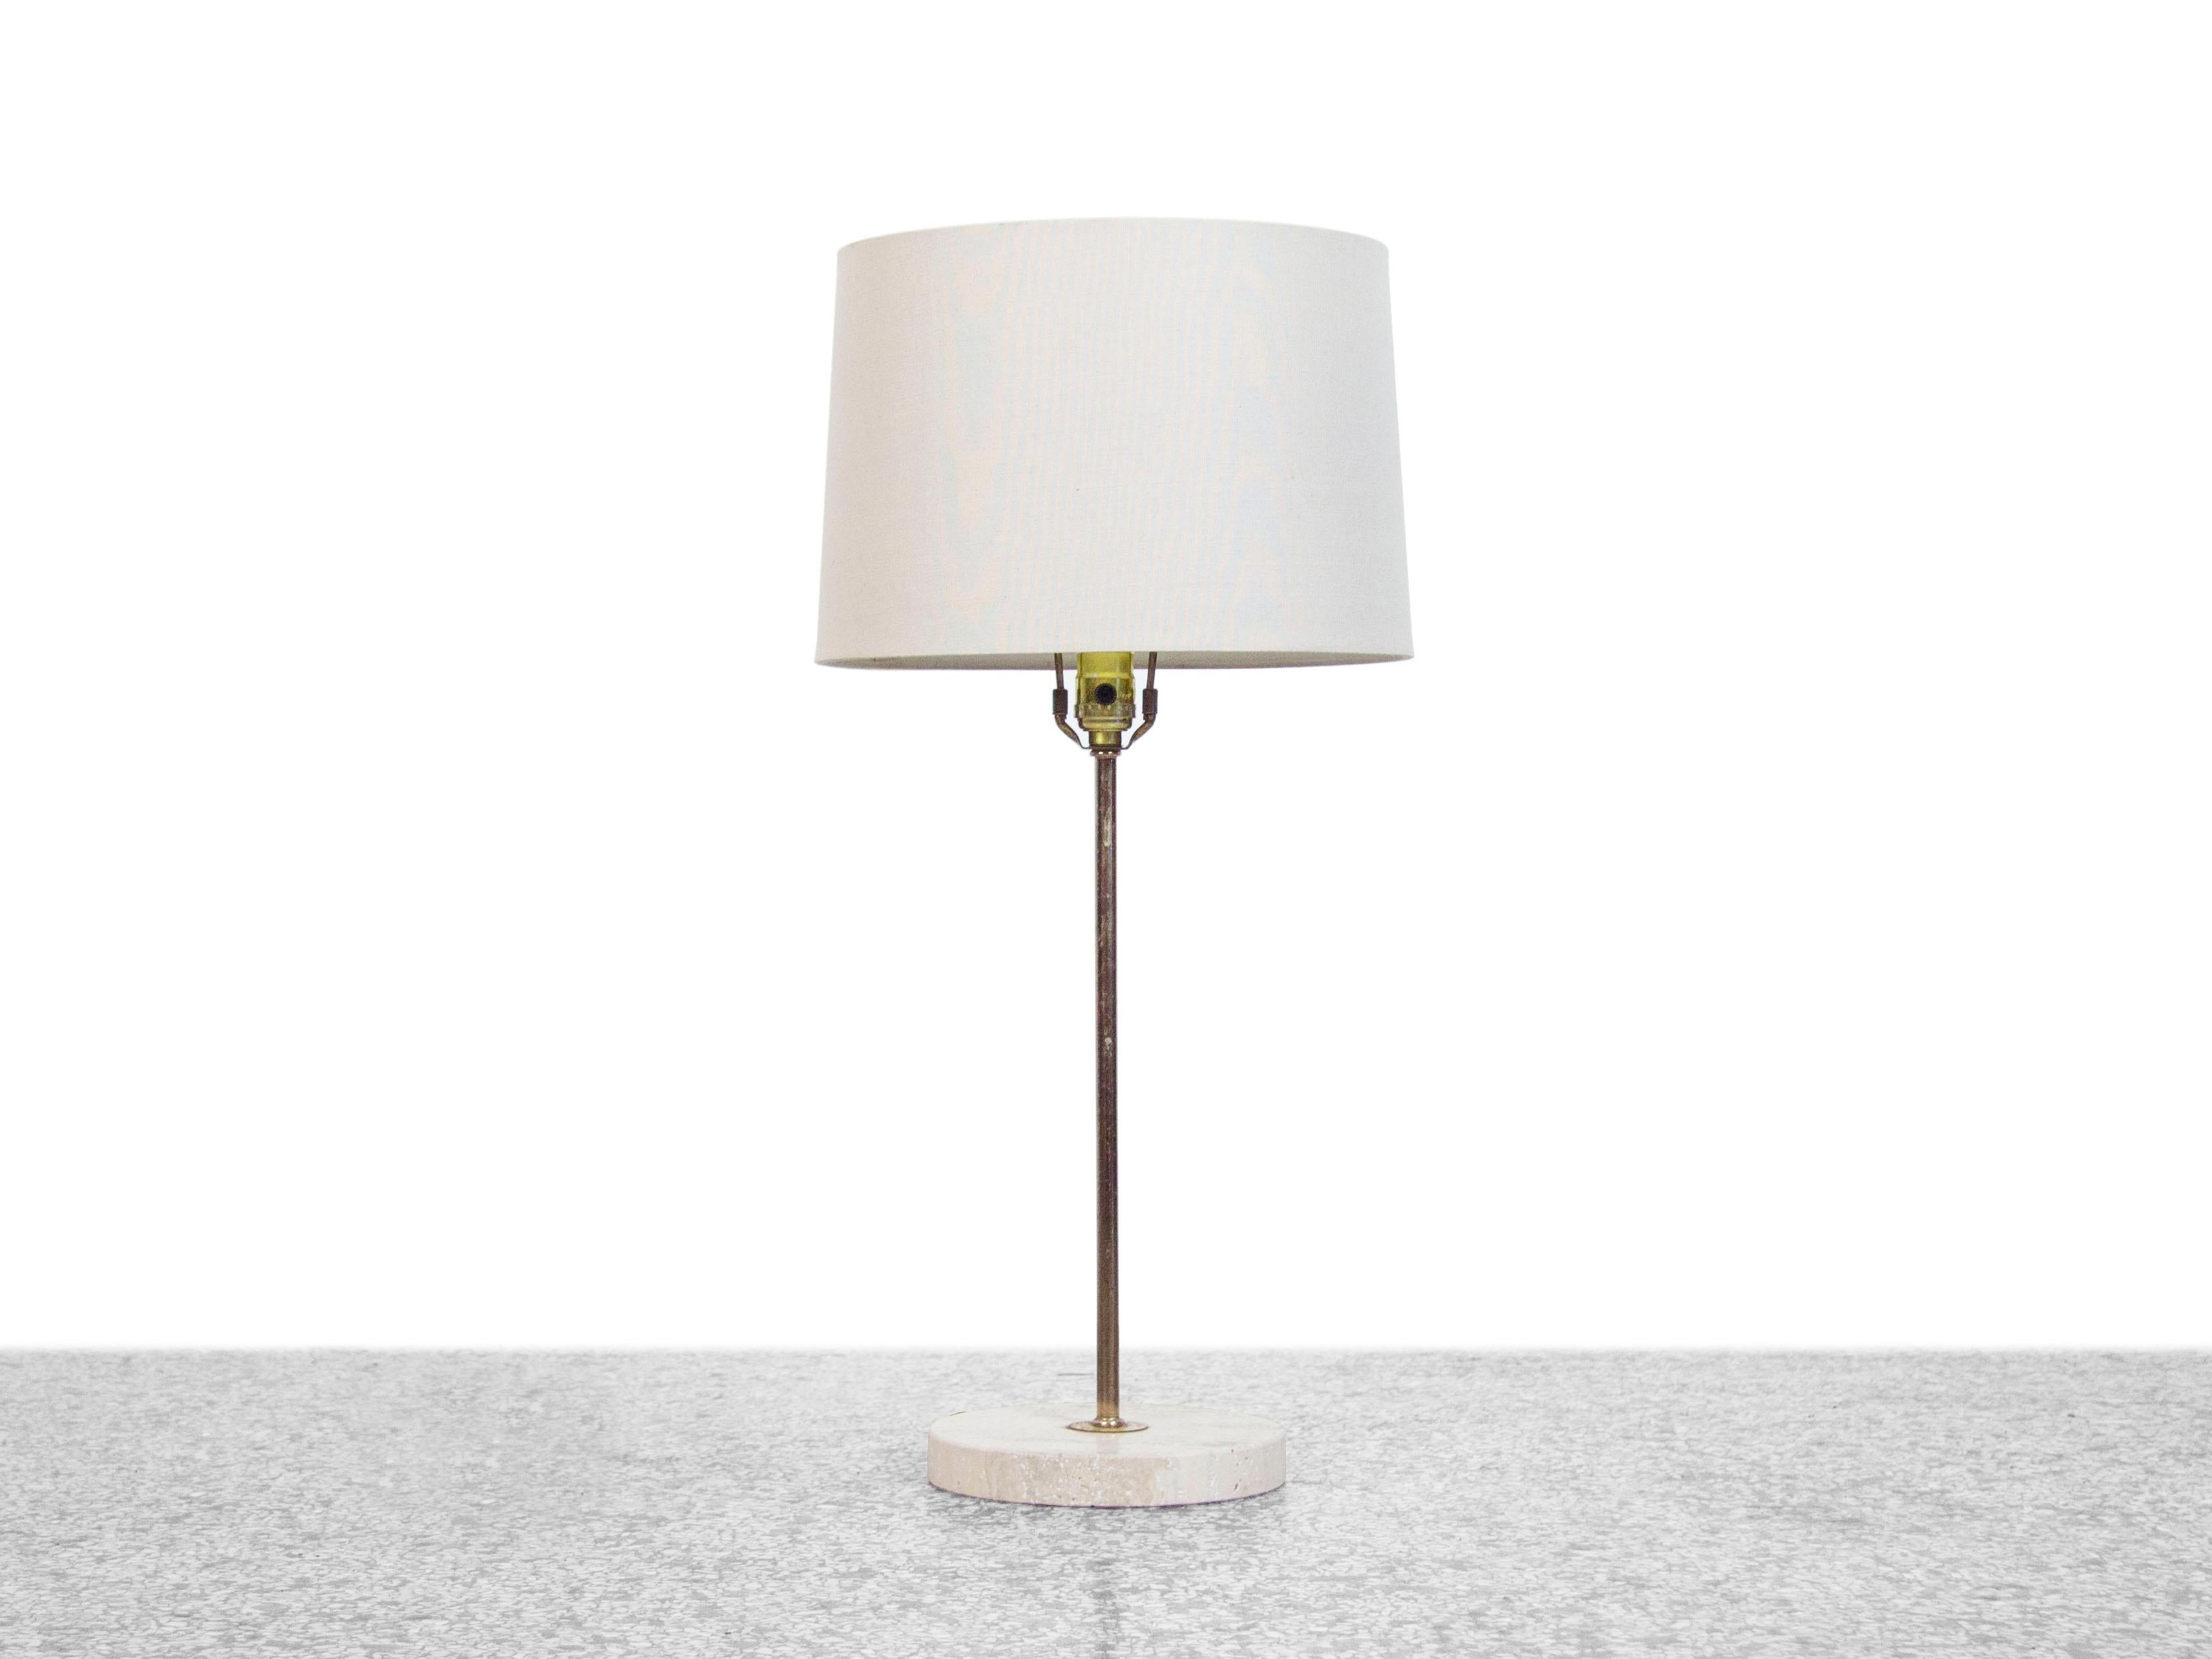 A vintage table lamp with a round travertine base and brass accents. 

*shade not included.